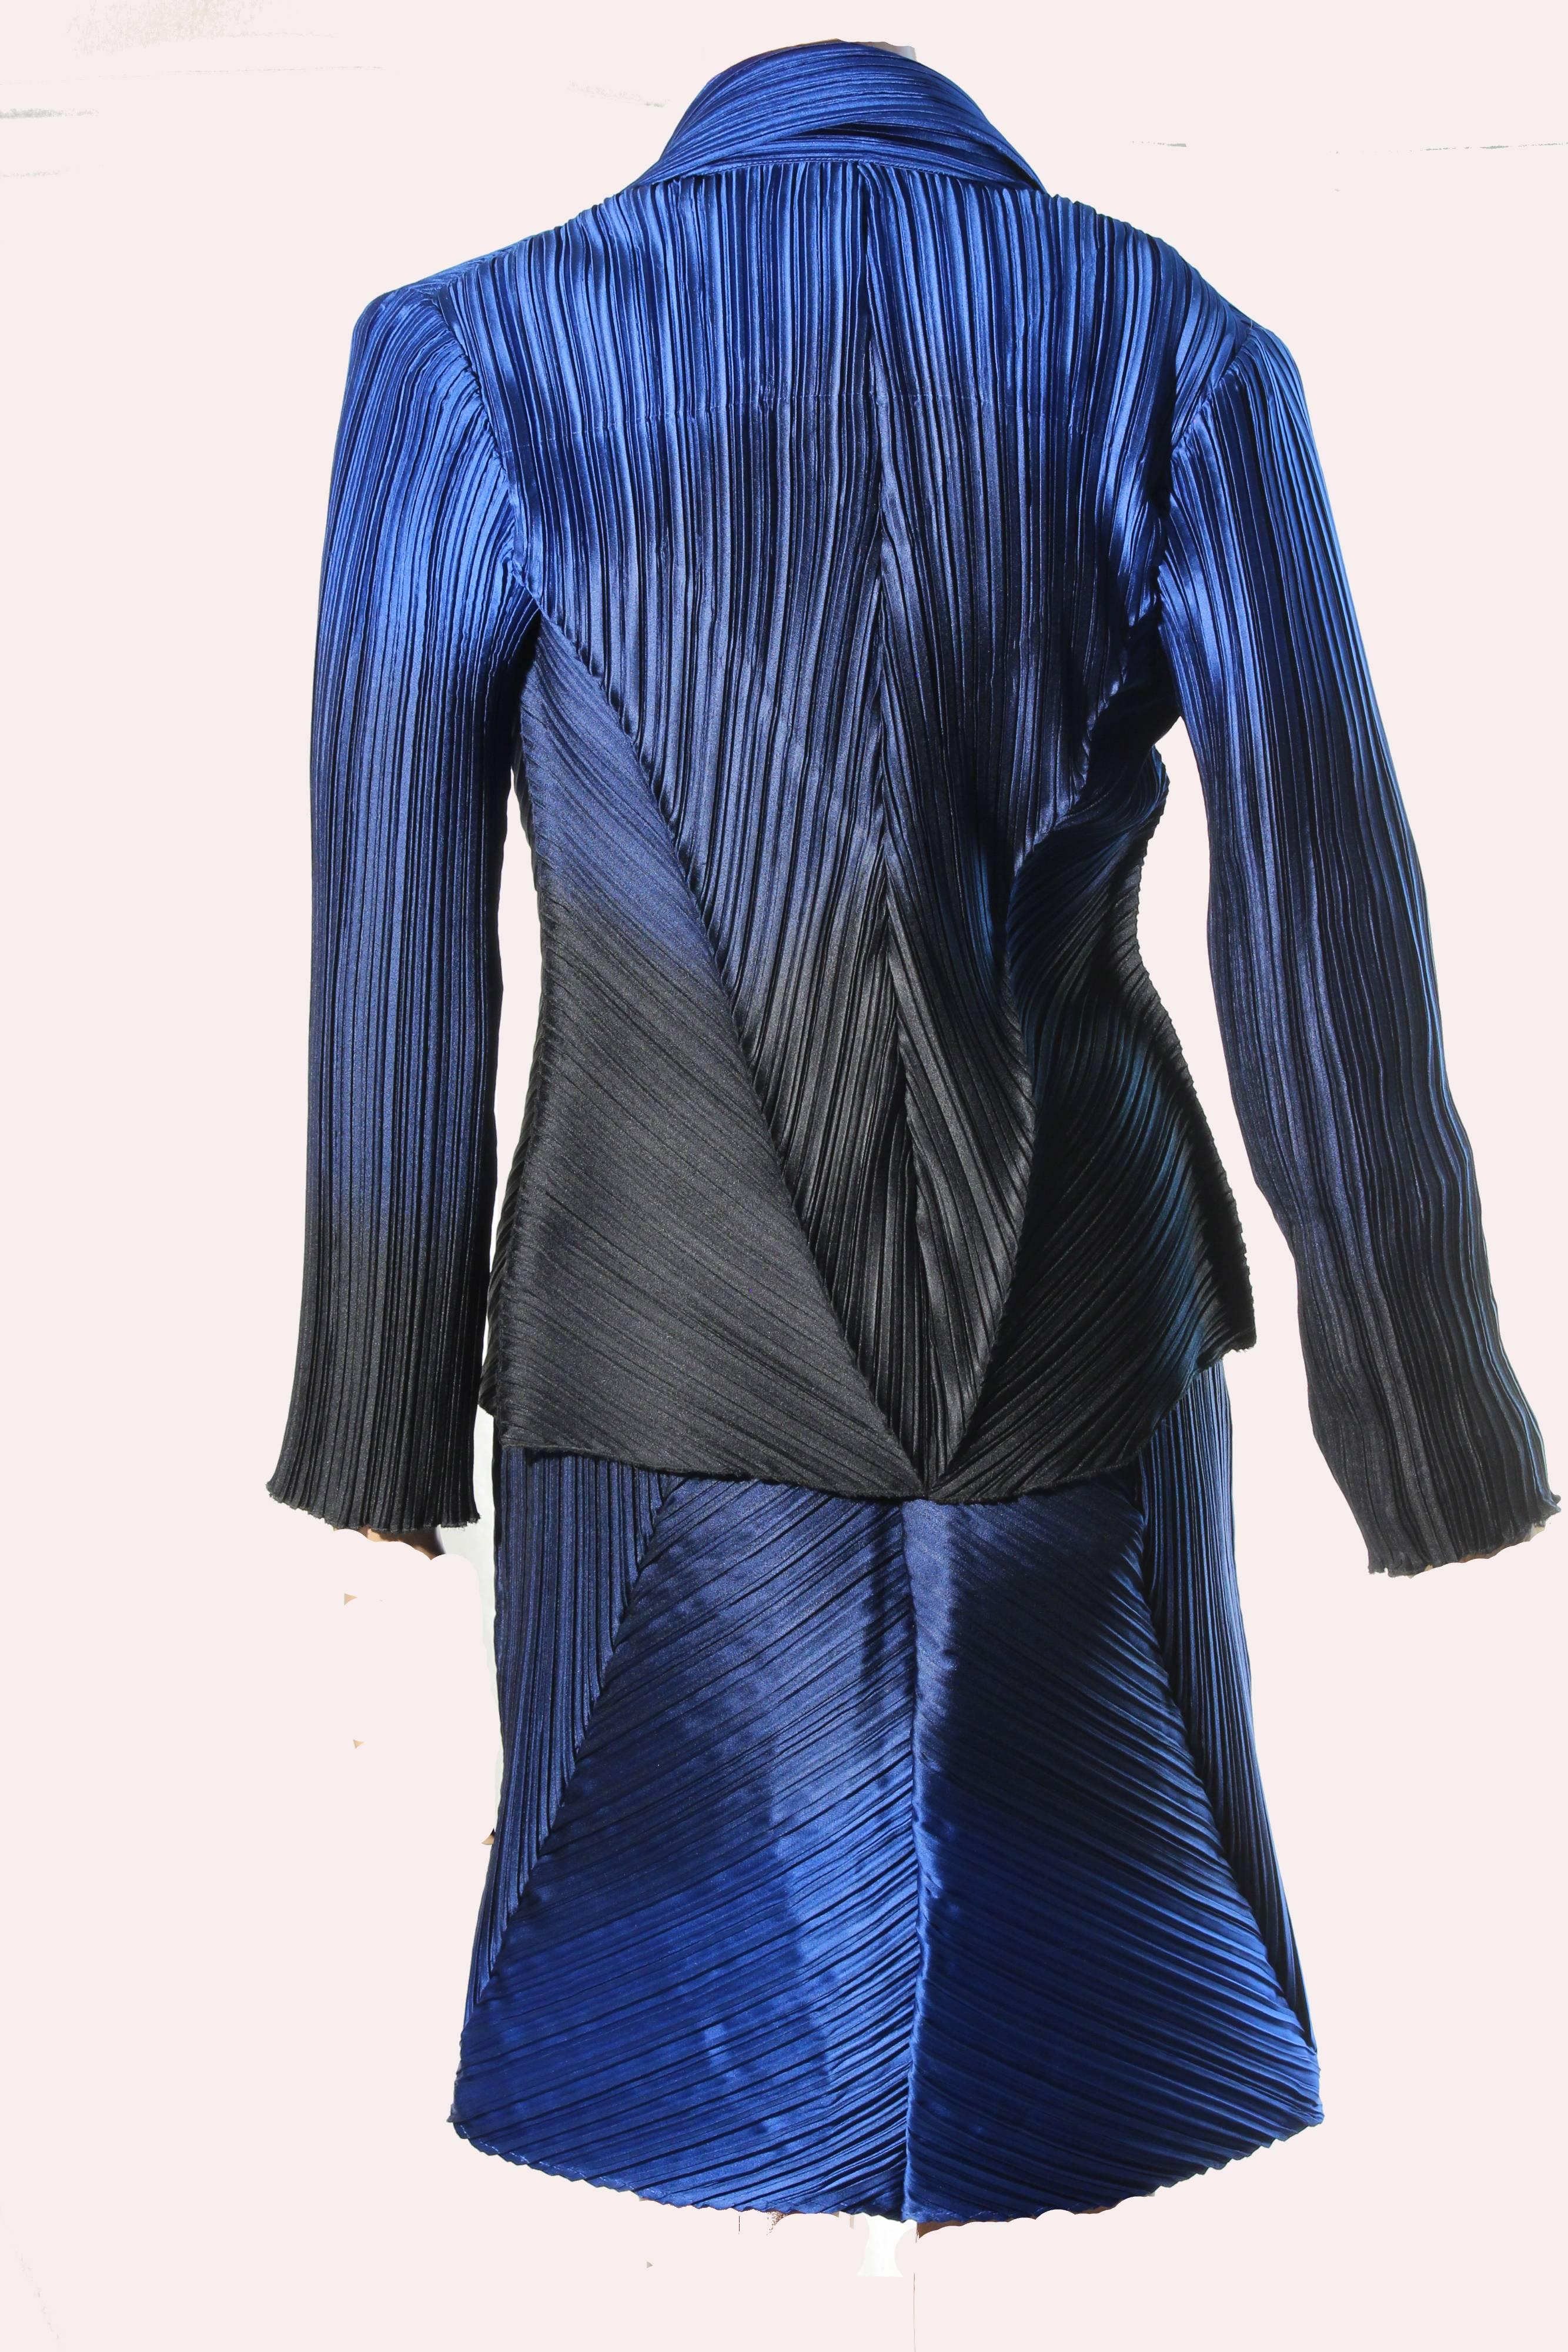 Issey Miyake Blue Ombre Micro Pleated Jacket and Skirt Suit Ensemble Japan Sz 2  2